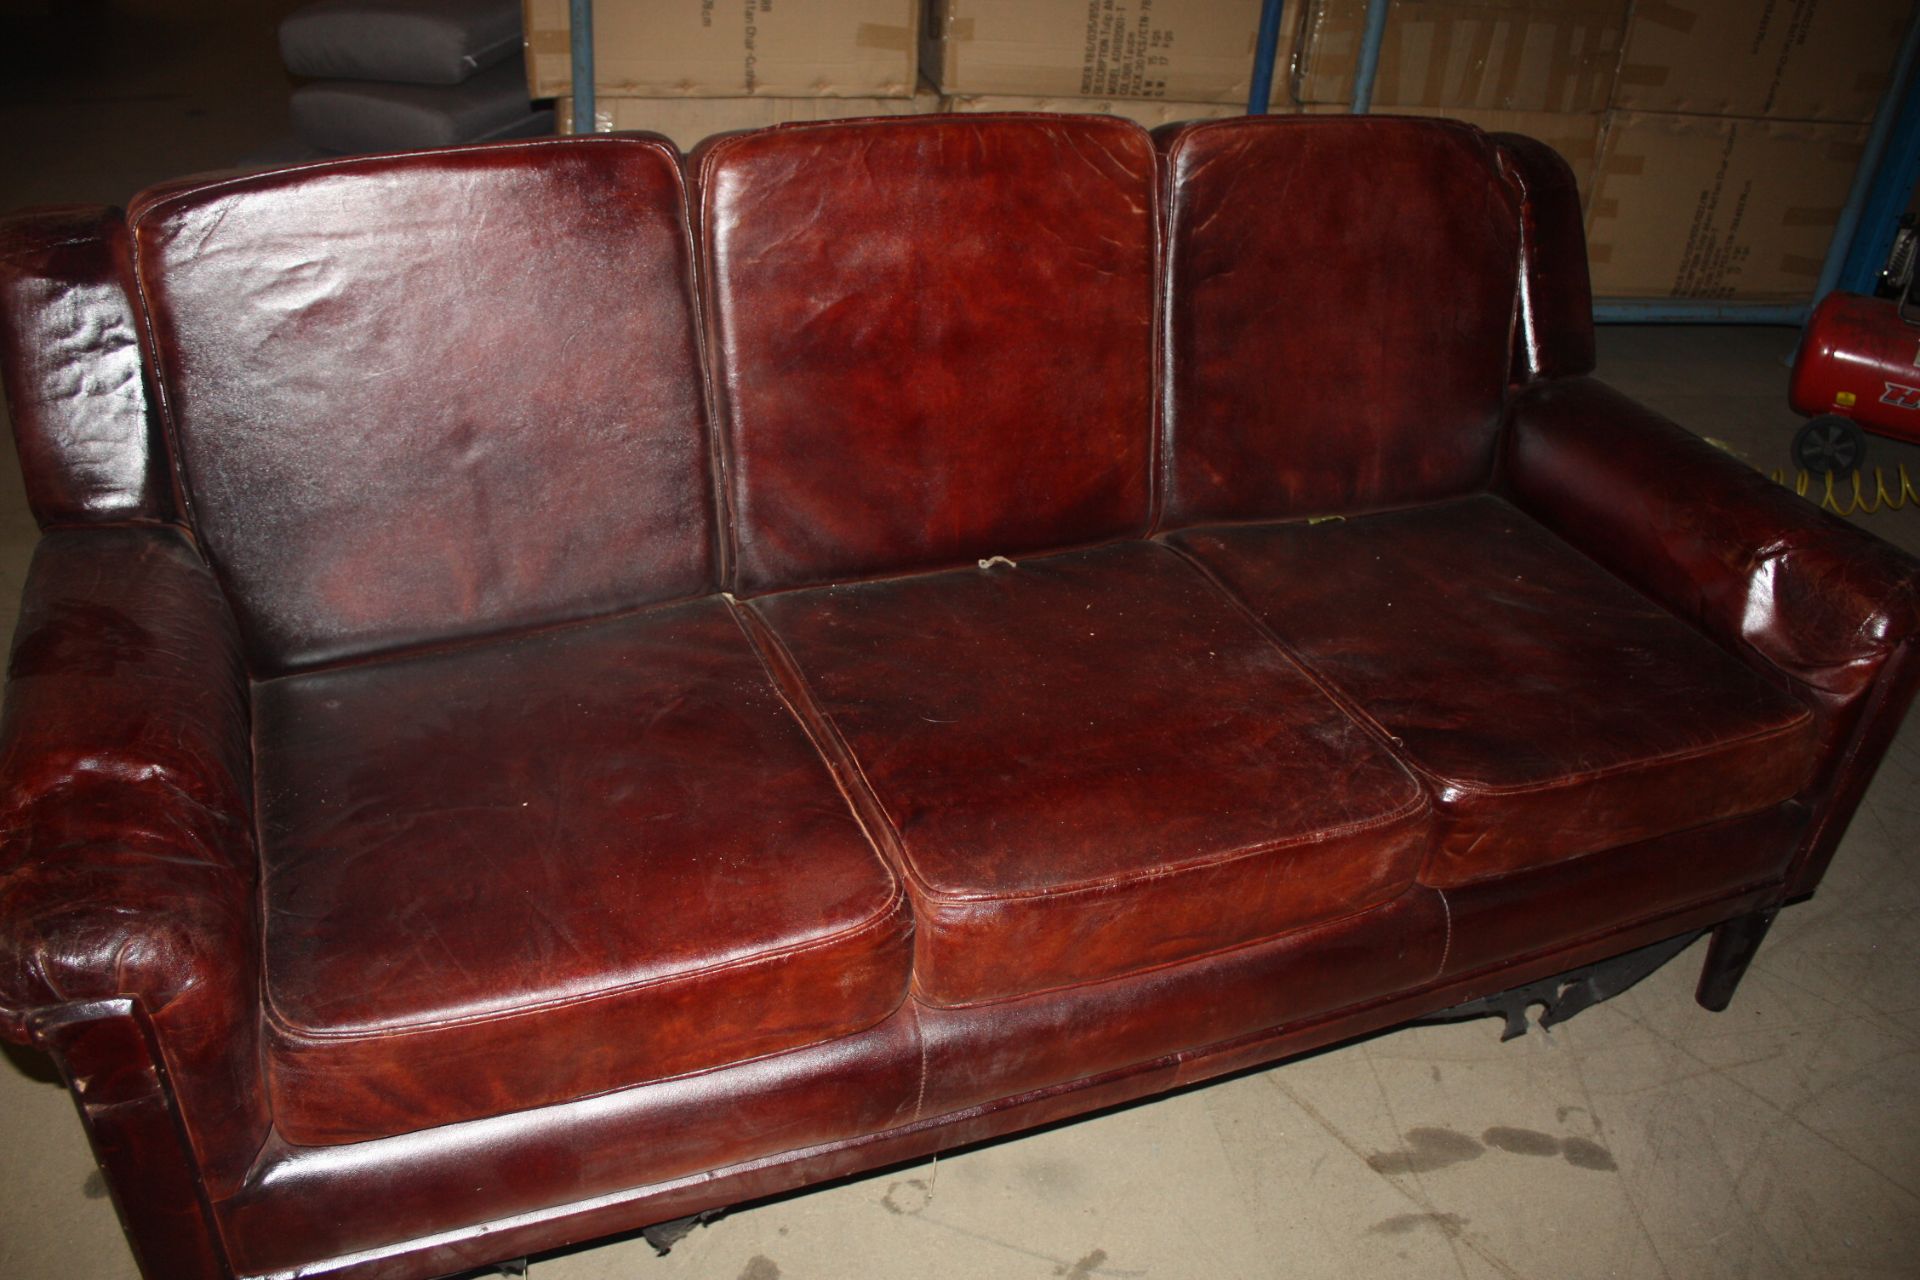 Chestnut 3 Seater Leather Sofa The Chestnut 3 Seater Sofa Is Solidly Constructed On A Wood Frame, - Image 2 of 4